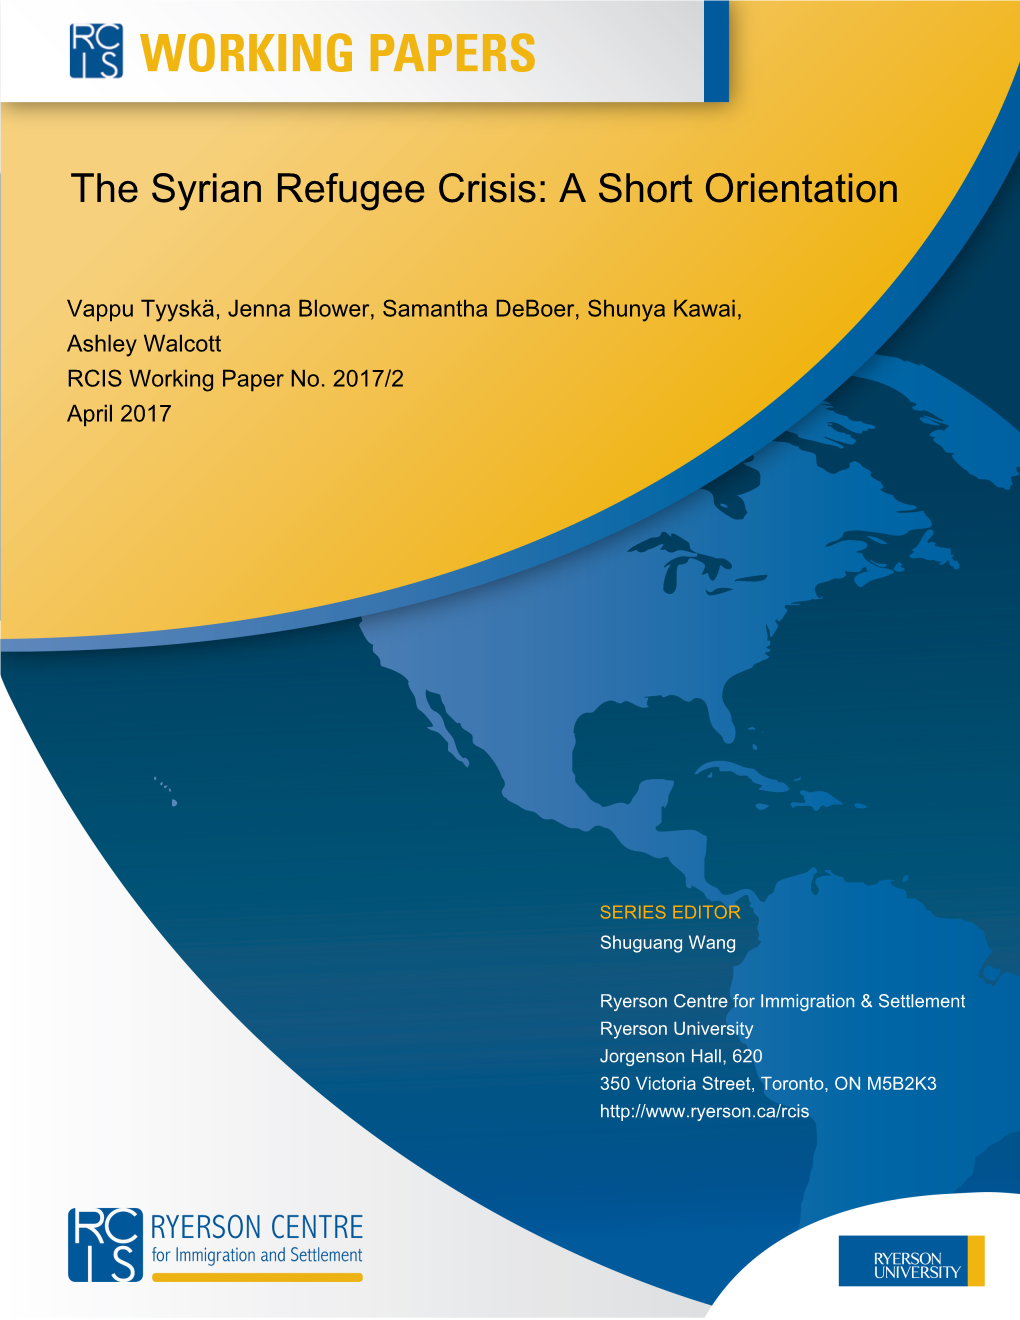 The Syrian Refugee Crisis: a Short Orientation